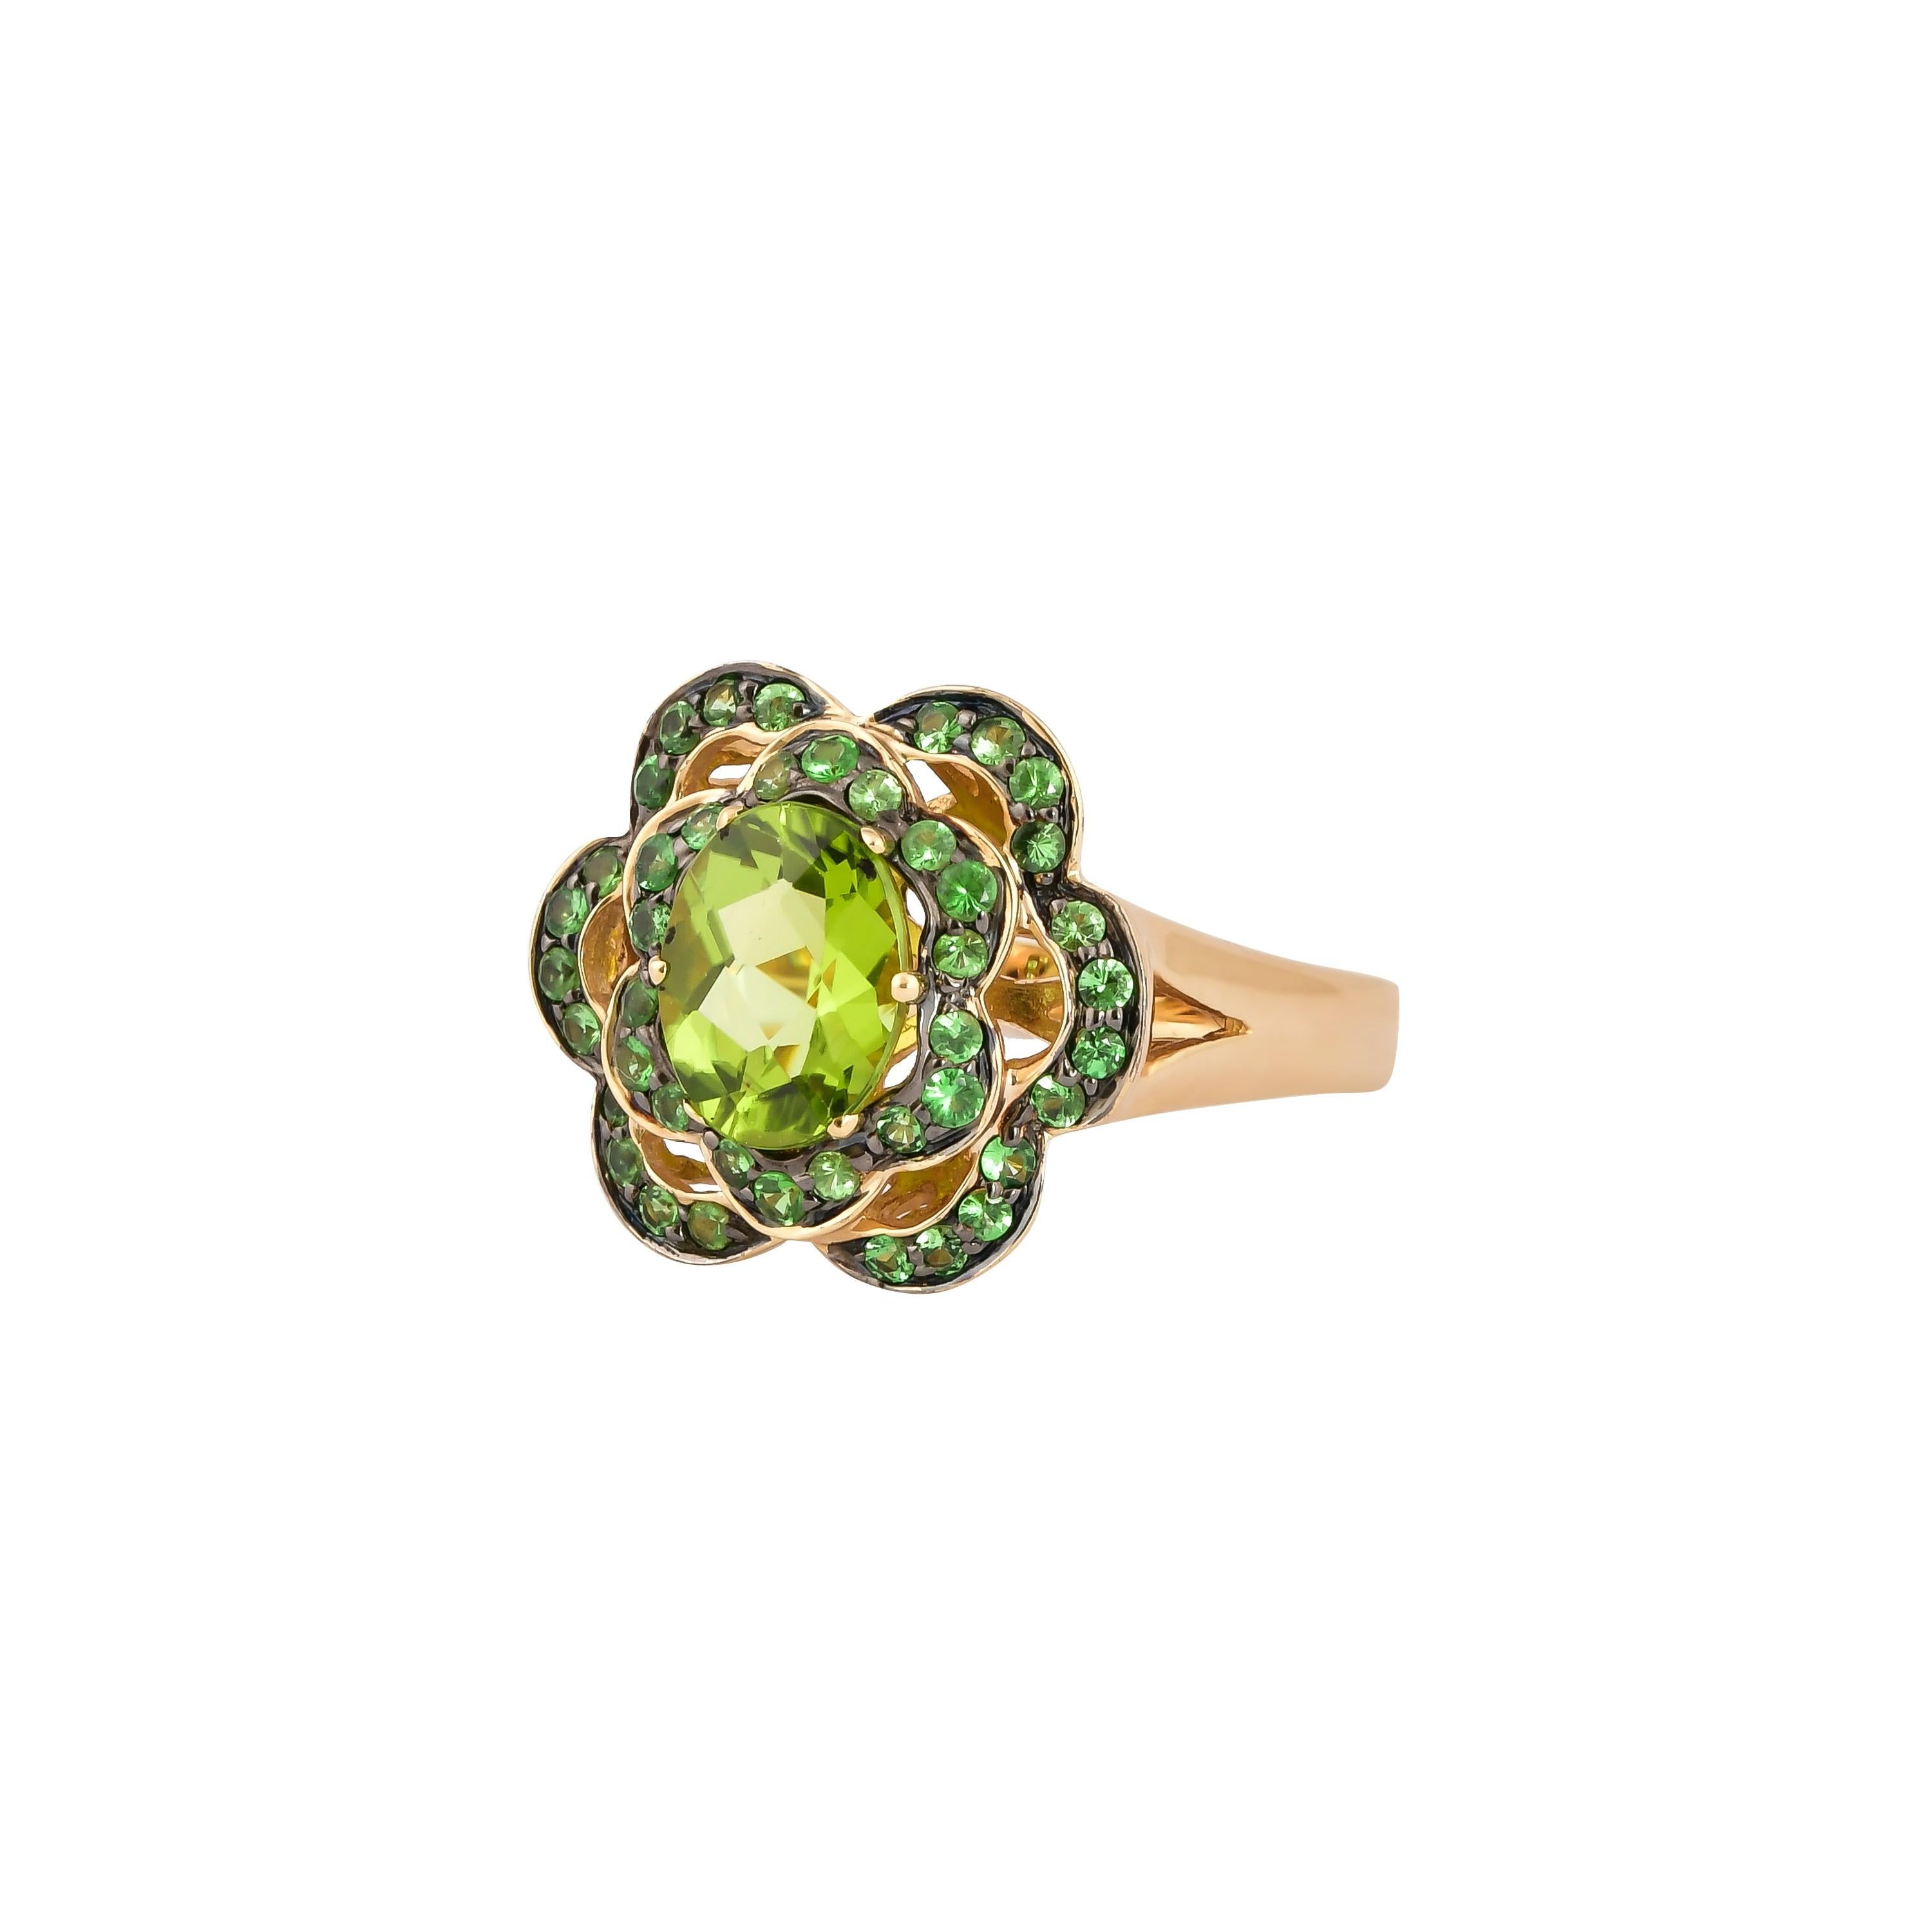 Contemporary 1.2 Carat Peridot and Tsavorite Ring in 14 Karat Yellow Gold For Sale